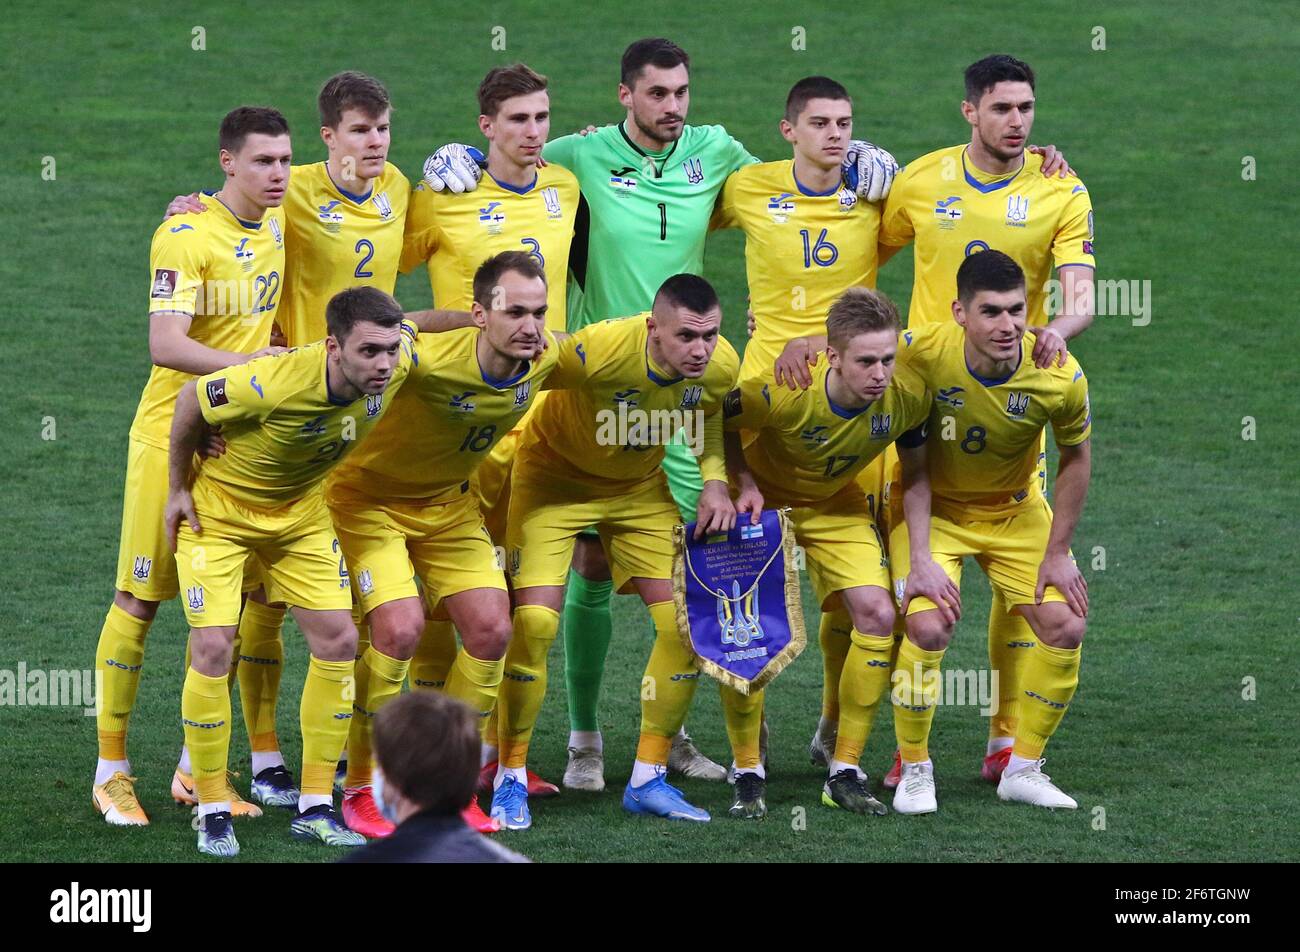 KYIV, UKRAINE - MARCH 28, 2021: Players of Ukraine National Team pose for a group photo before the FIFA World Cup 2022 Qualifying round game Ukraine v Finland at NSK Olimpiyskiy stadium in Kyiv Stock Photo